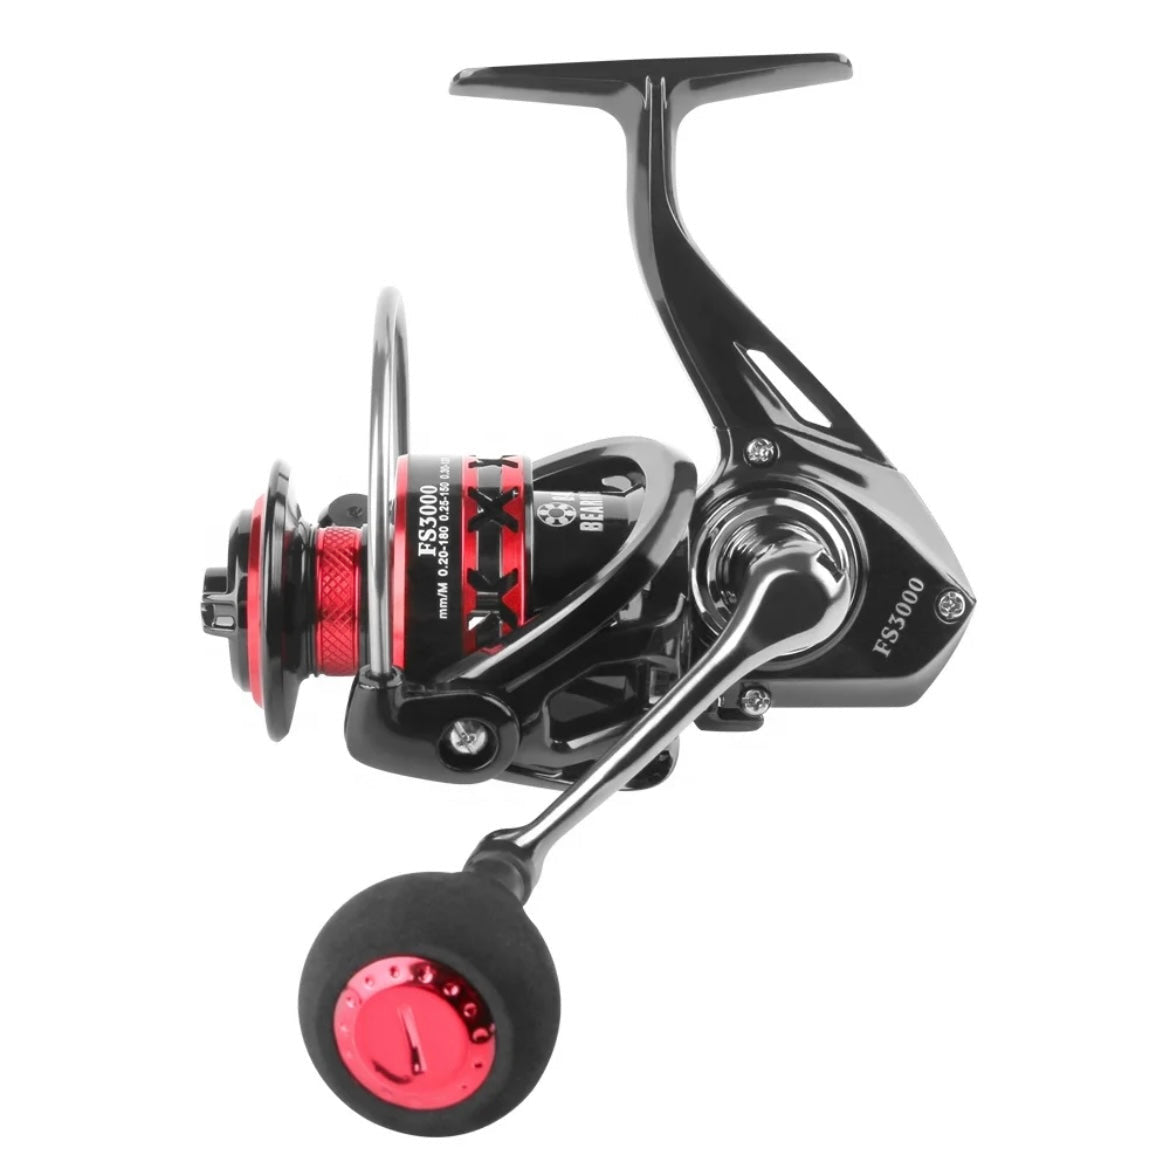 COMBO SET KNIGHT 2.7M KALIOU 3000 SPINNING REEL WITH ACCES0RIES